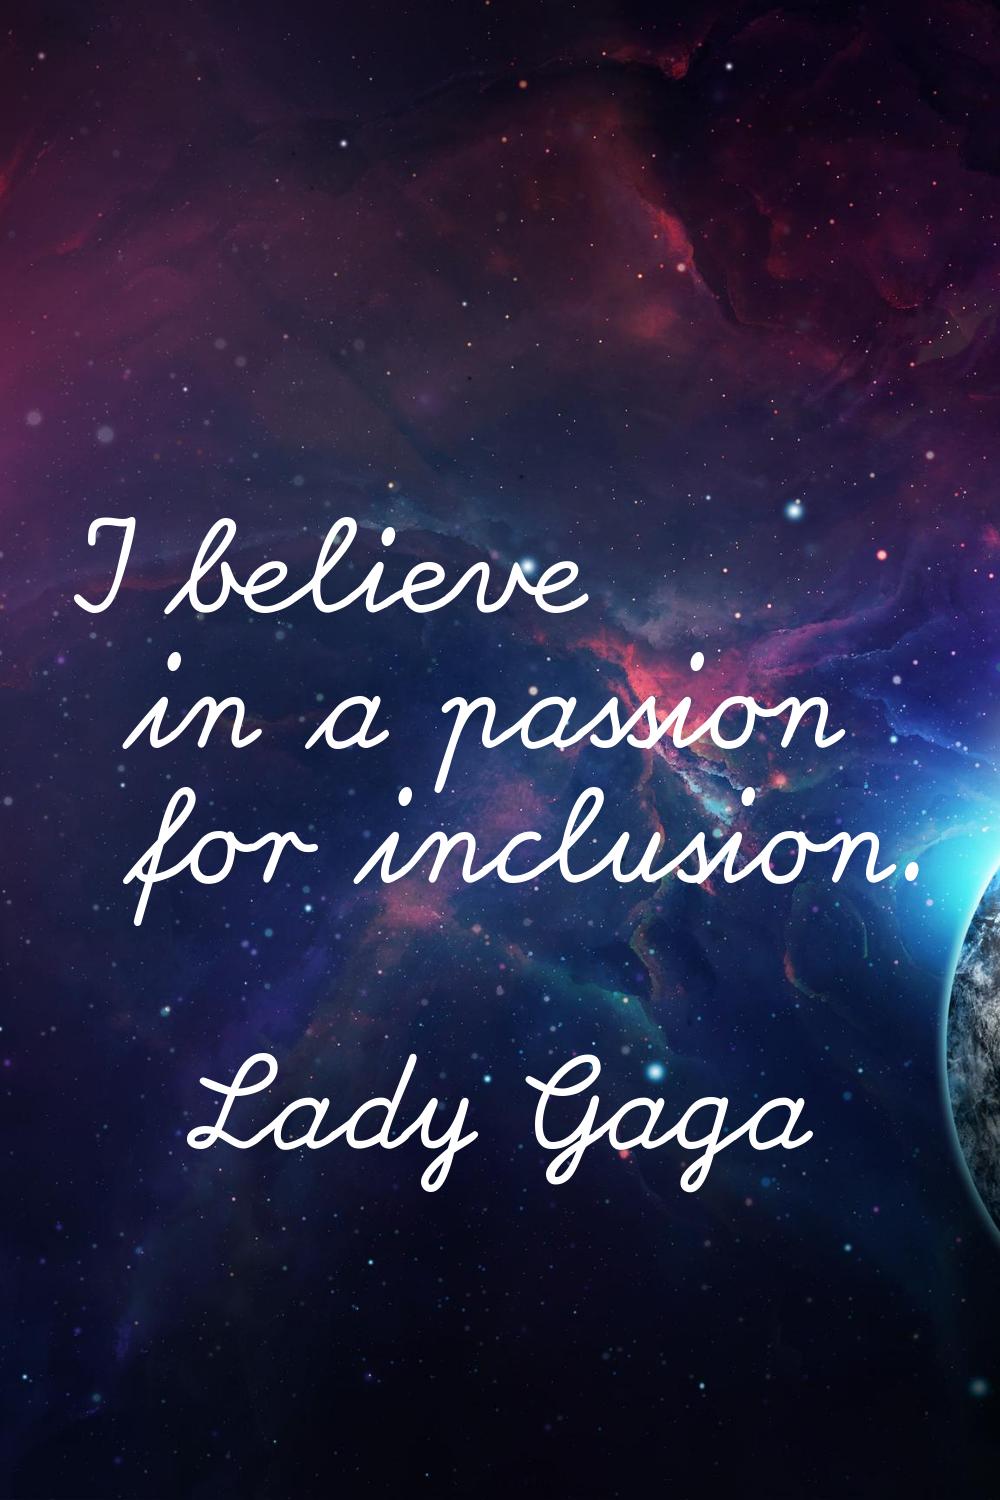 I believe in a passion for inclusion.